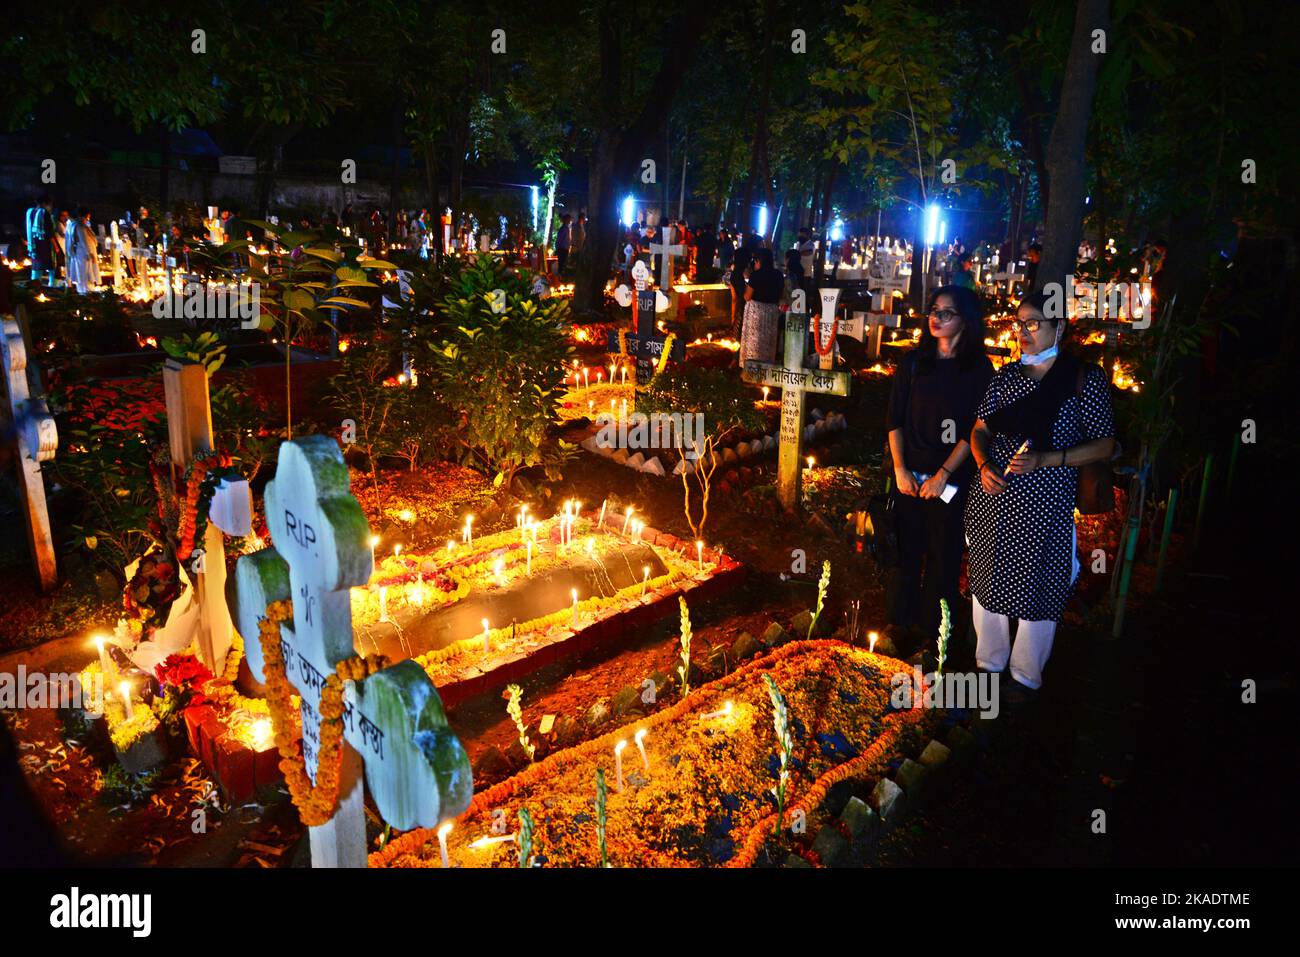 Dhaka, Bangladesh, on November 2, 2022. Dhaka, Bangladesh, on November 2, 2022. Christian devotees light candles on graves of relatives during the celebrations of All Souls Day in a cemetery at Wari Cemetery of Holy Cross Church in Dhaka, Bangladesh, on November 2, 2022. Stock Photo